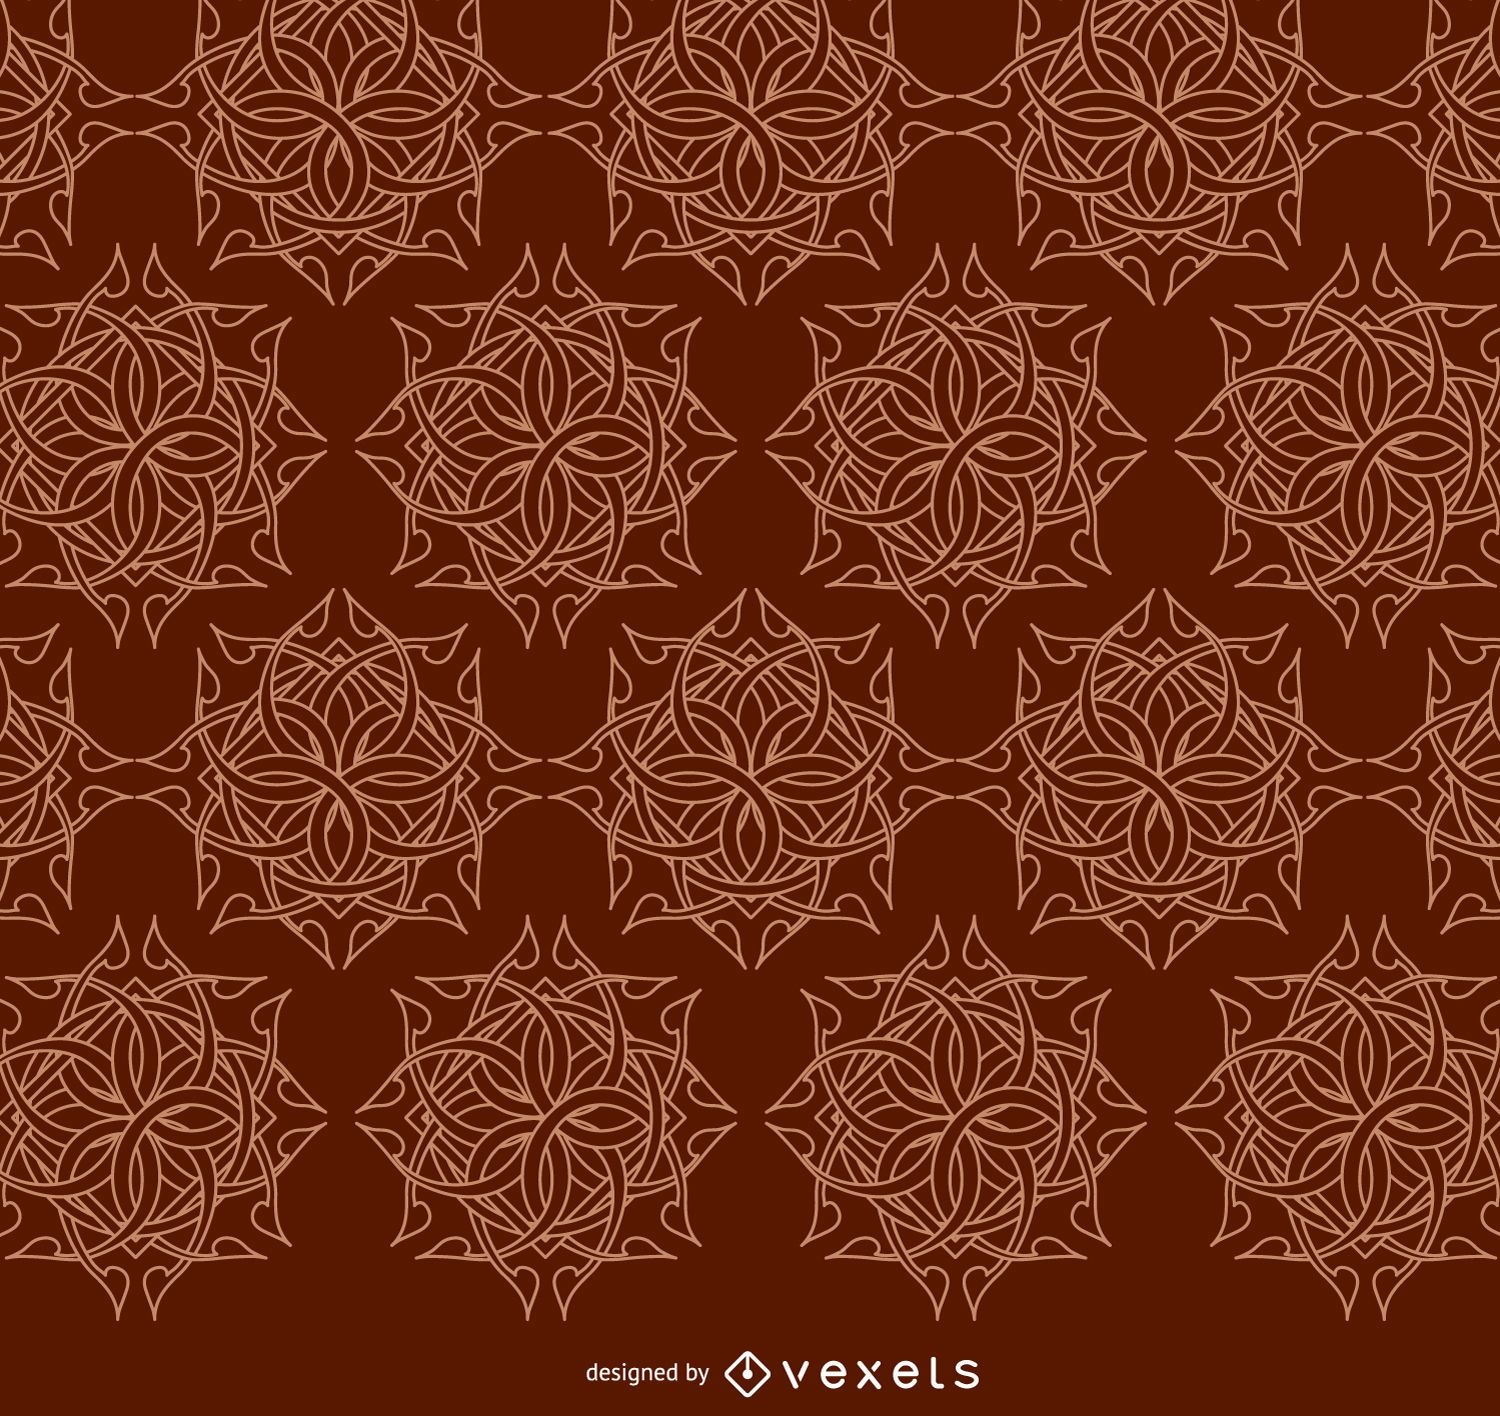 Celtic ornaments brown pattern